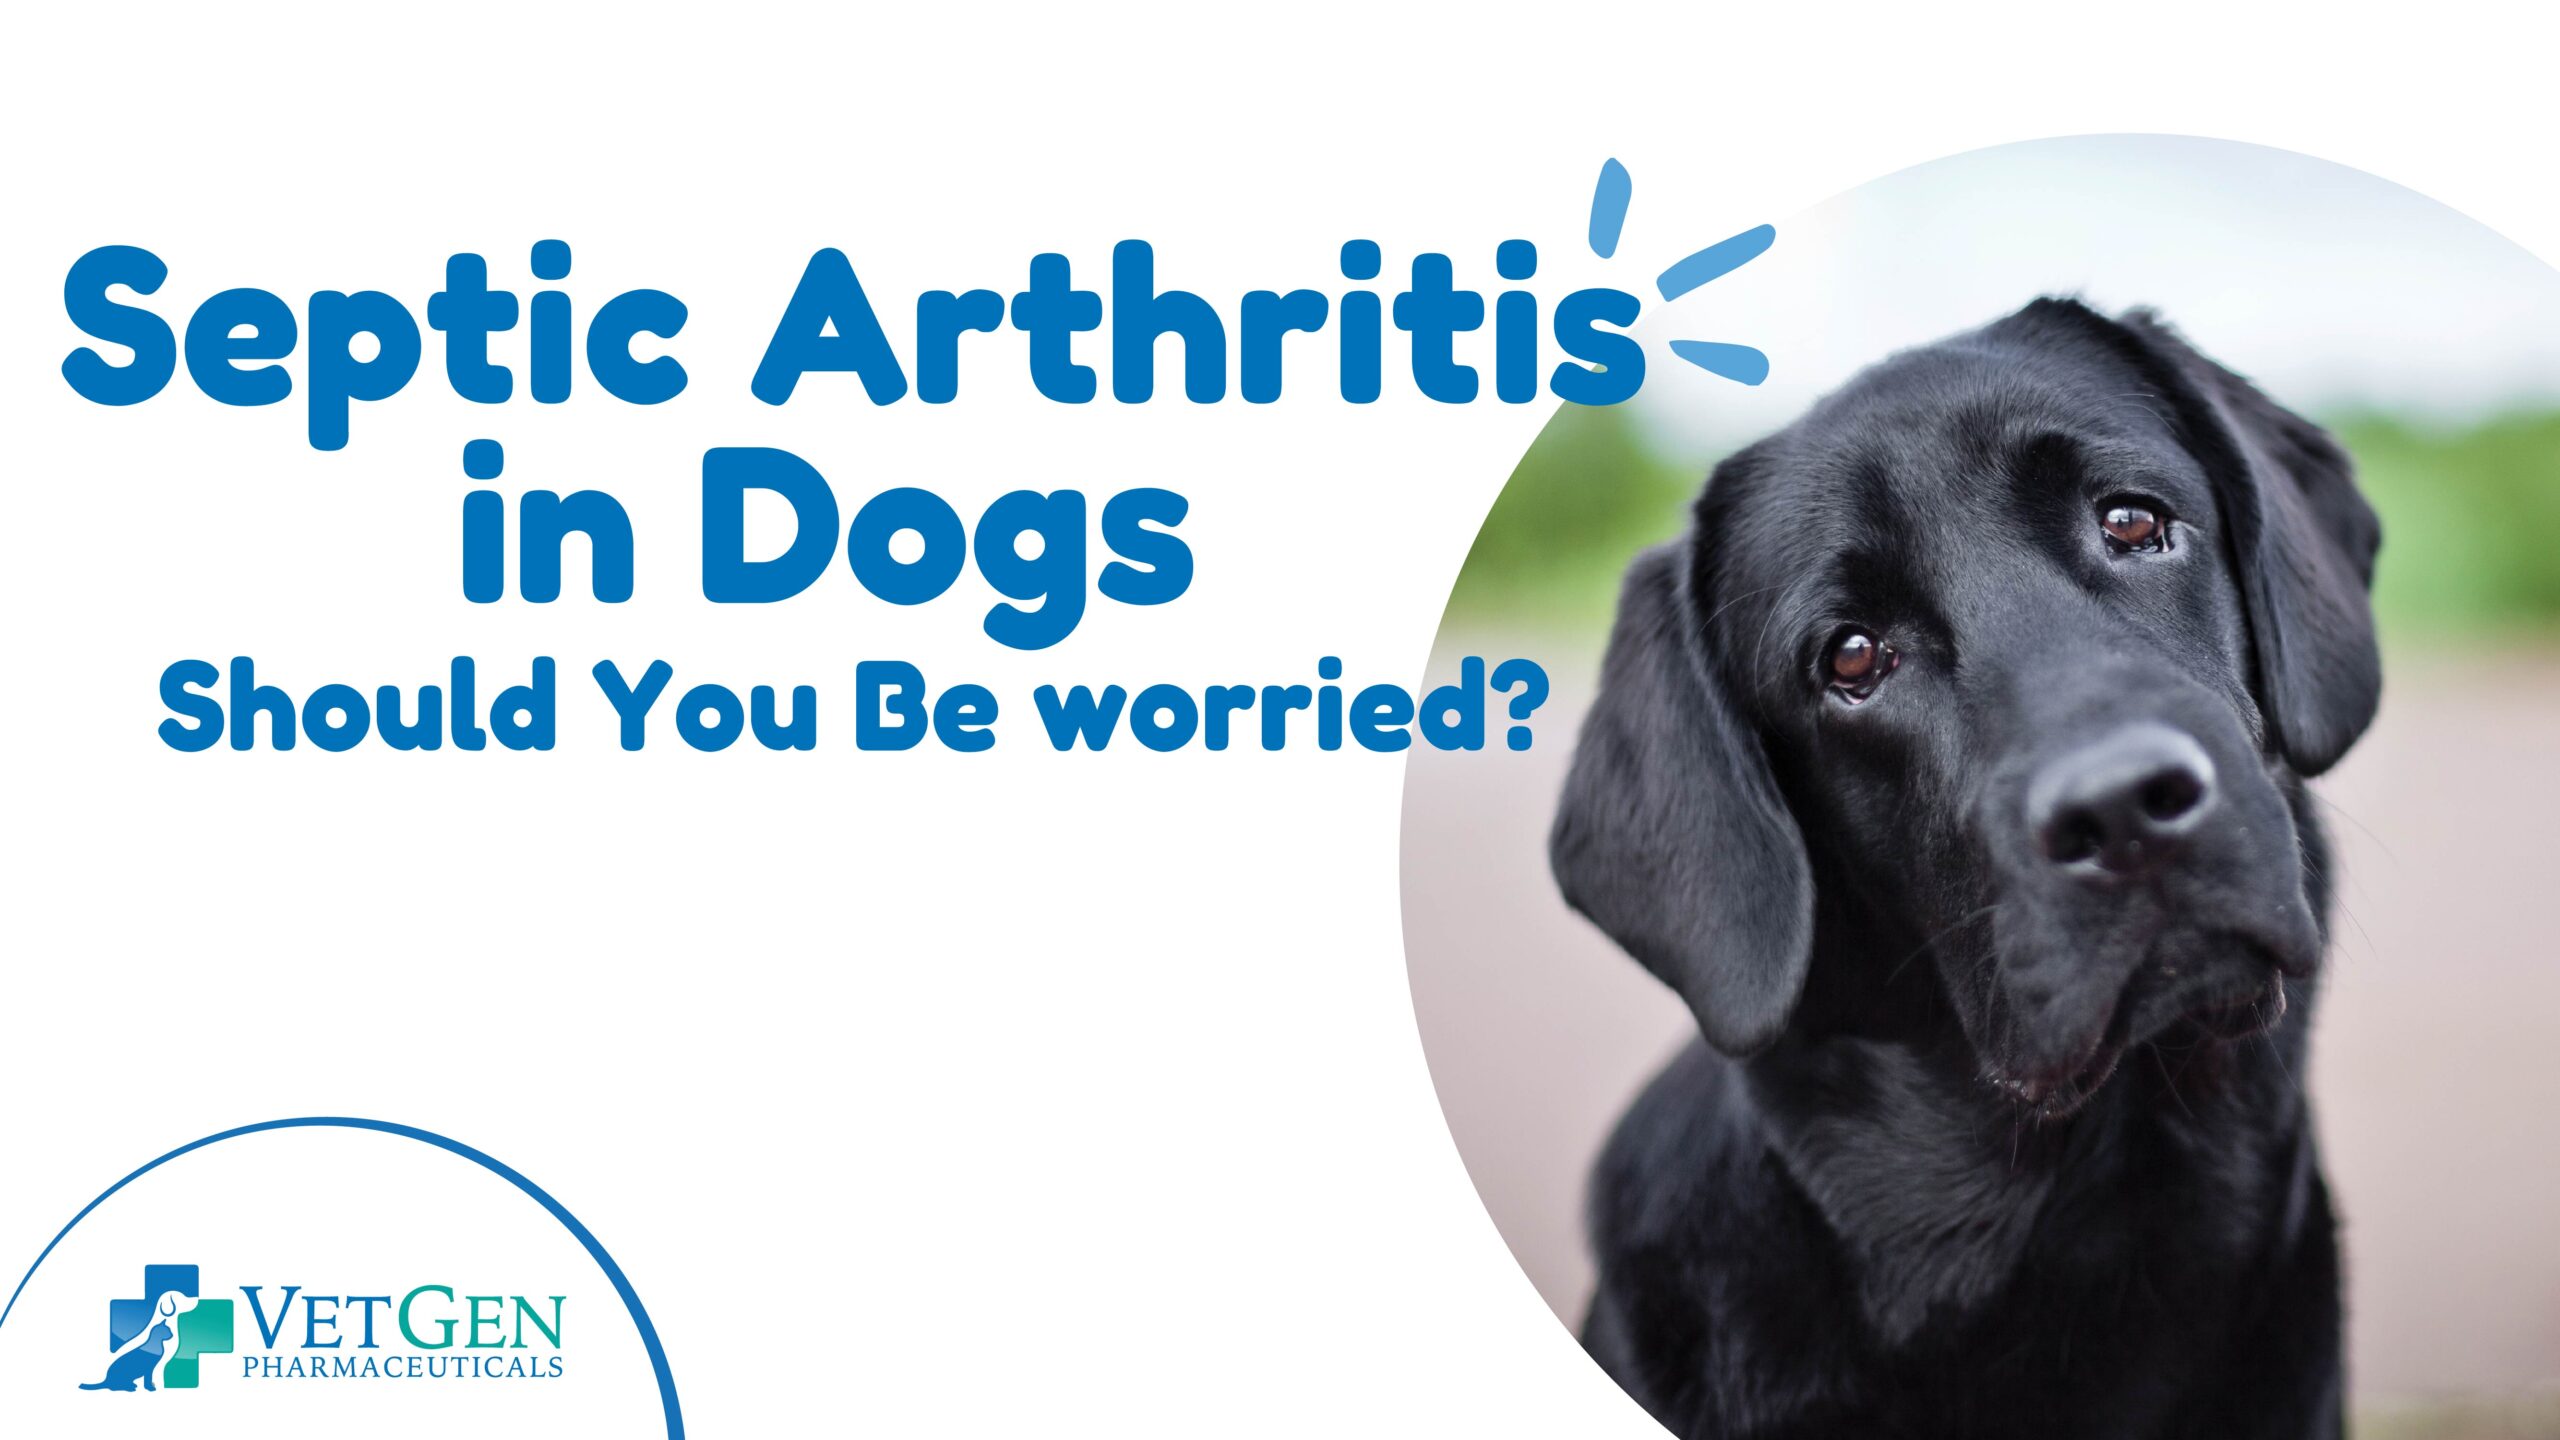 Septic Arthritis in Dogs – Should You Be worried